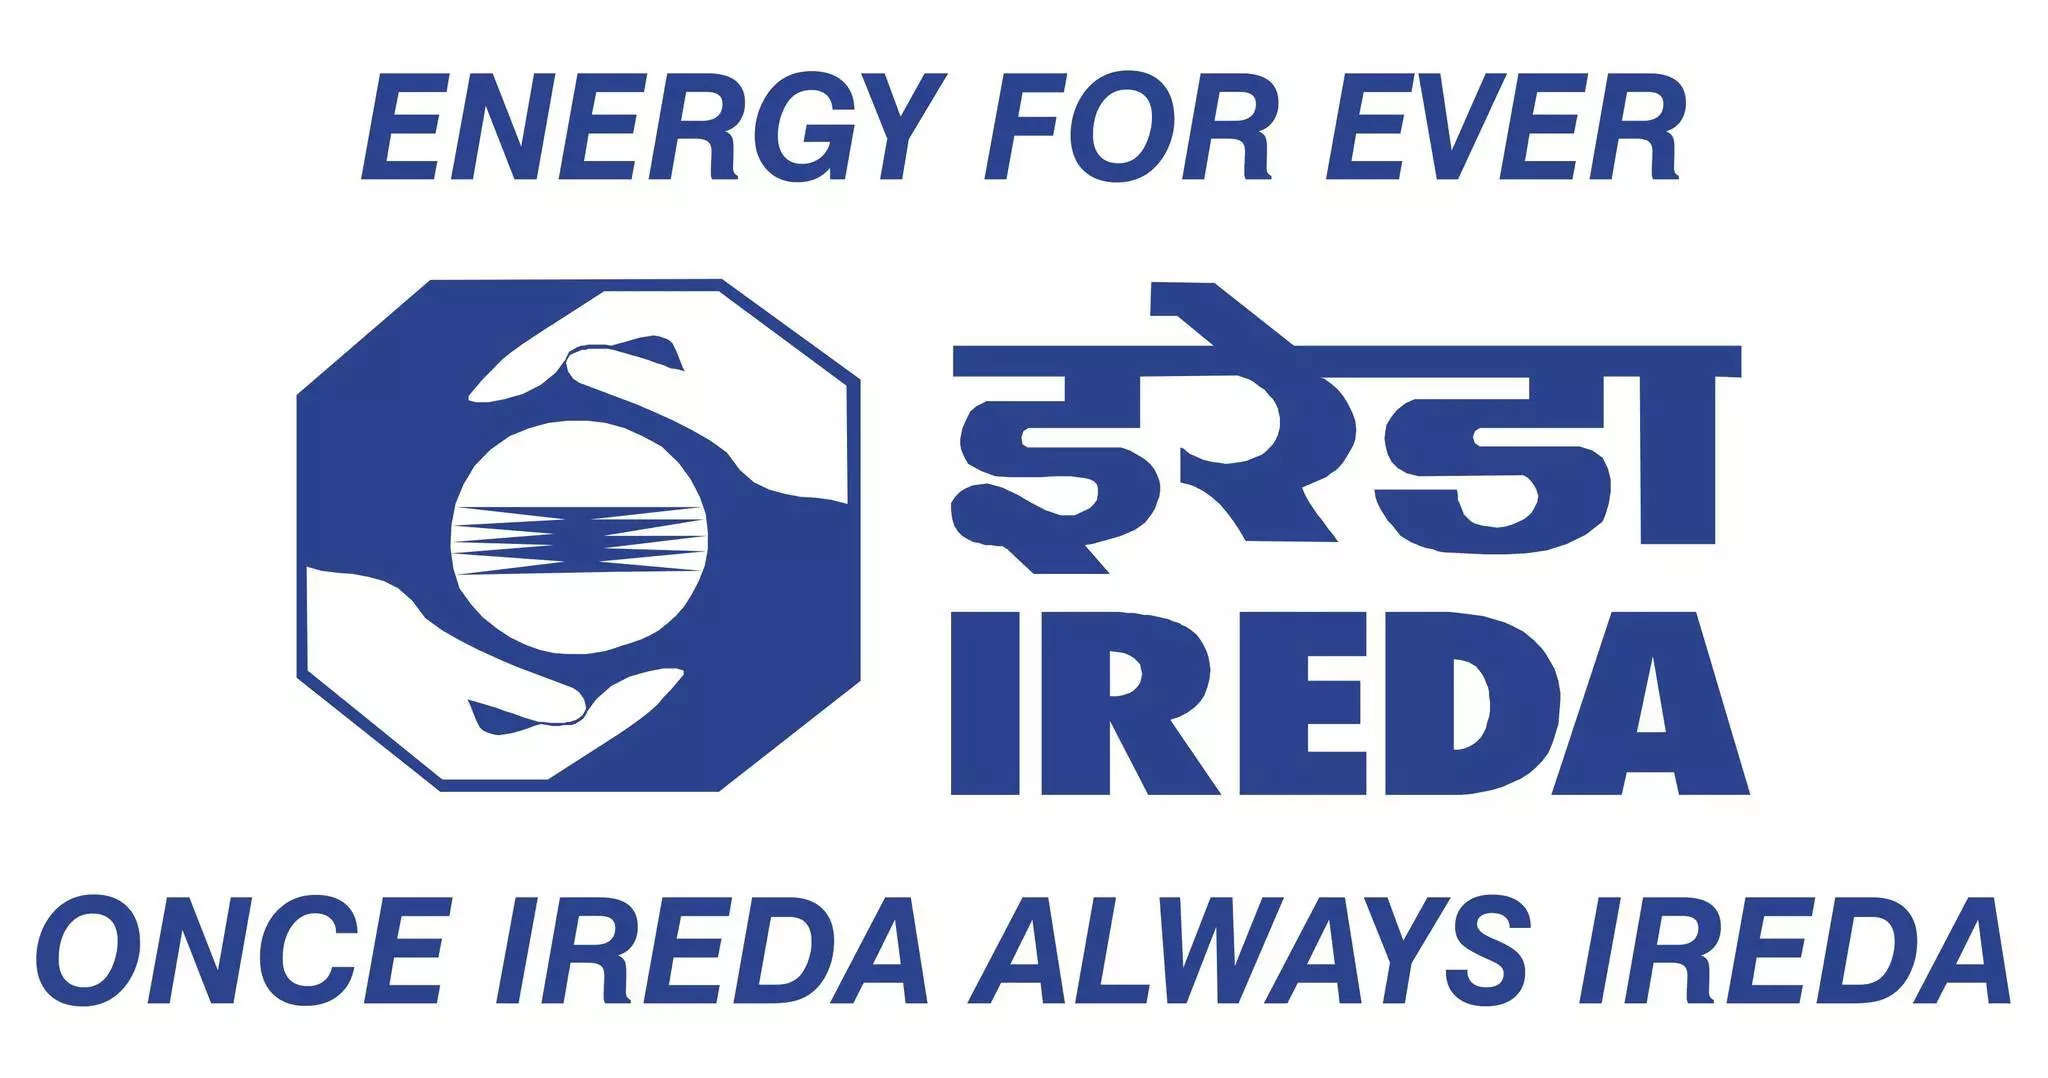 Phillip Capital sees a 56% downside potential in IREDA shares as best value already priced in 